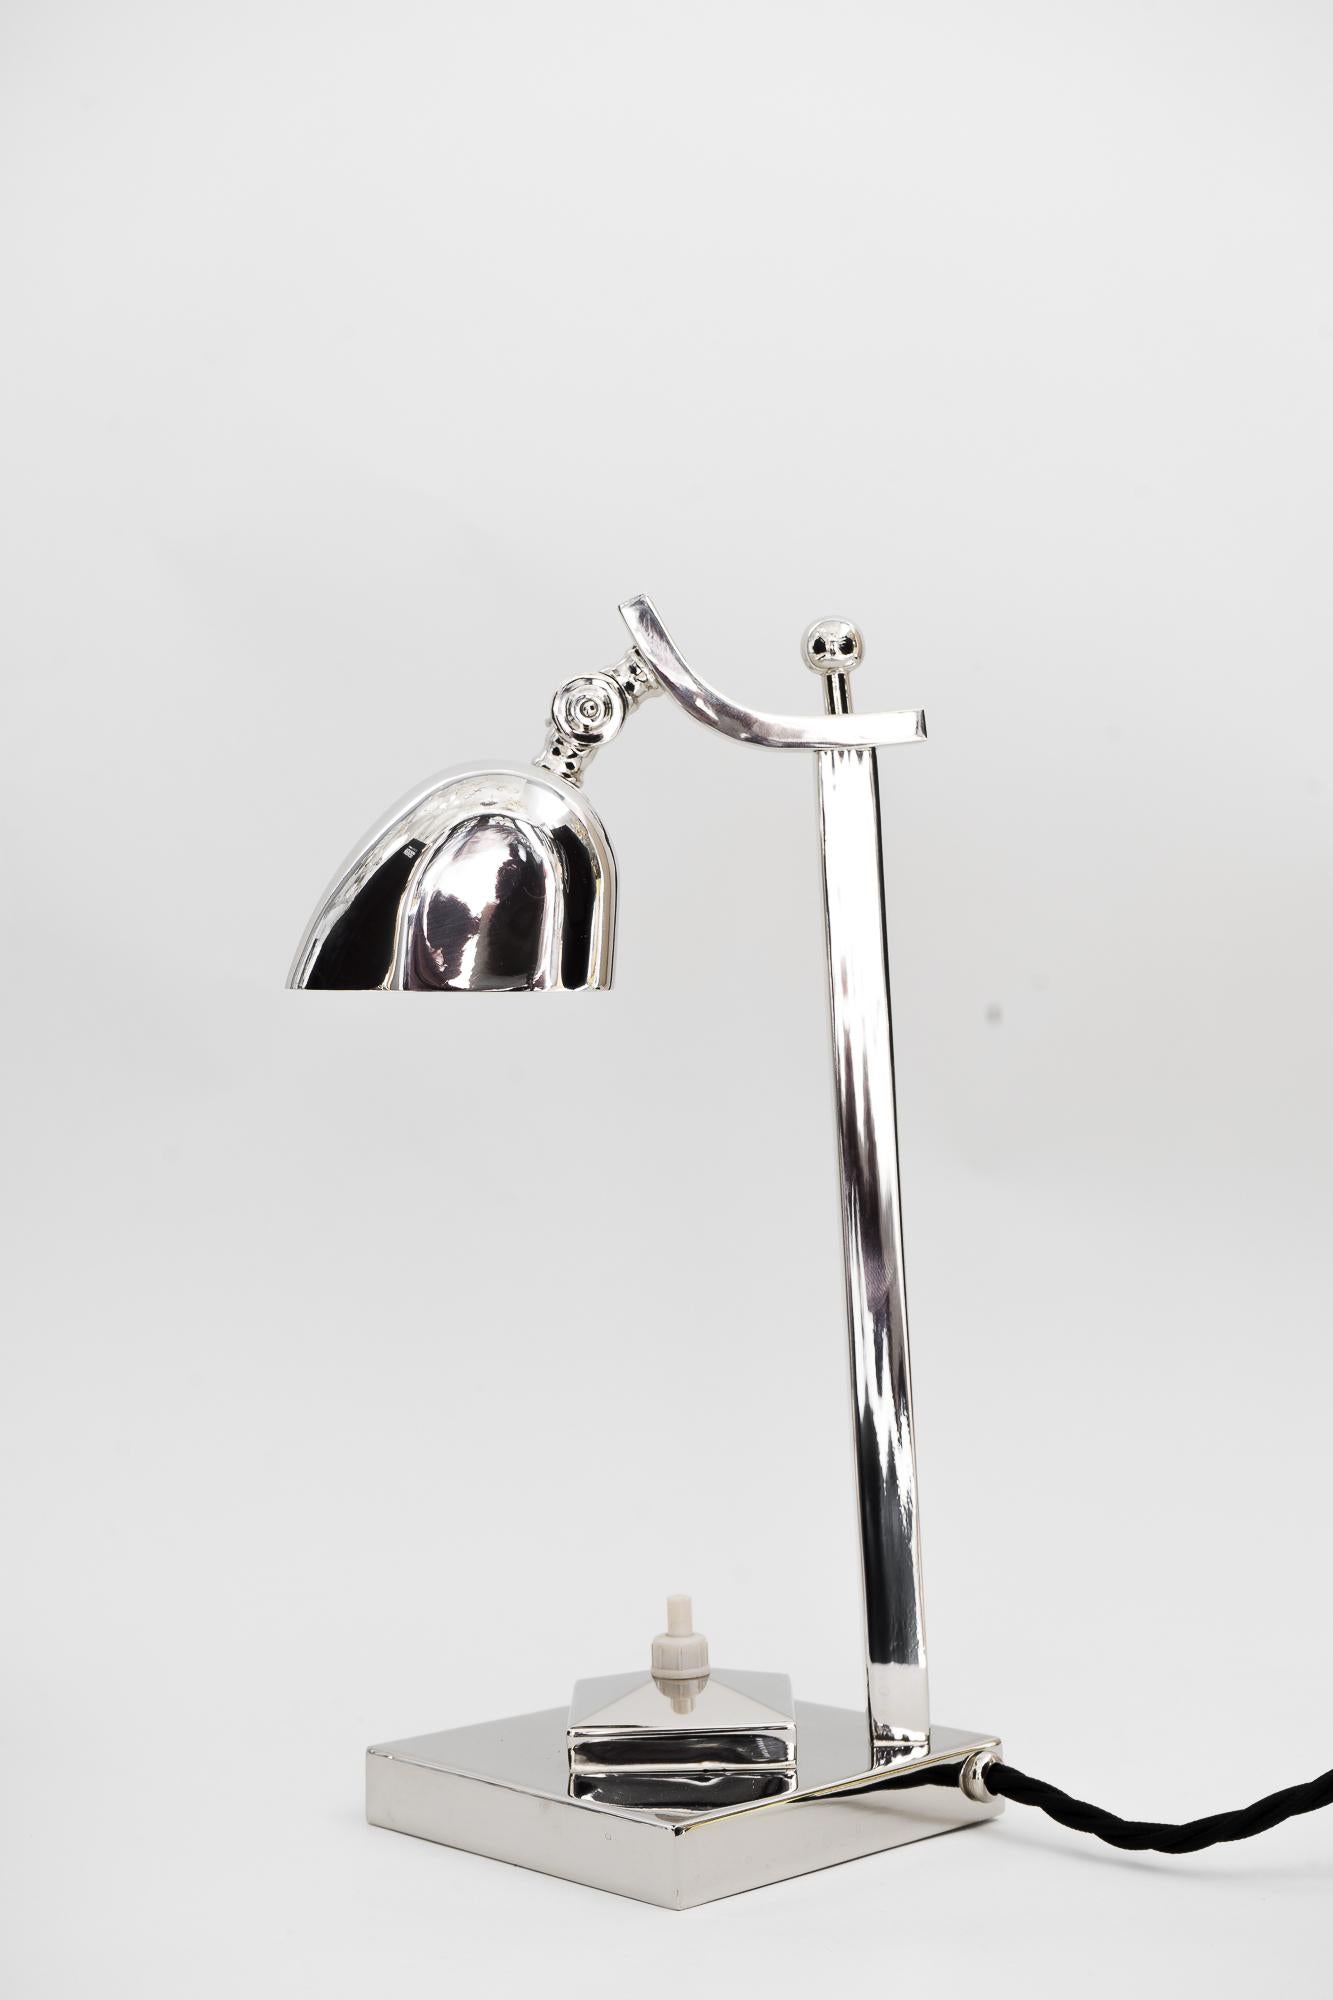 Plated Swiveling Art Deco Table Lamp, circa 1920s